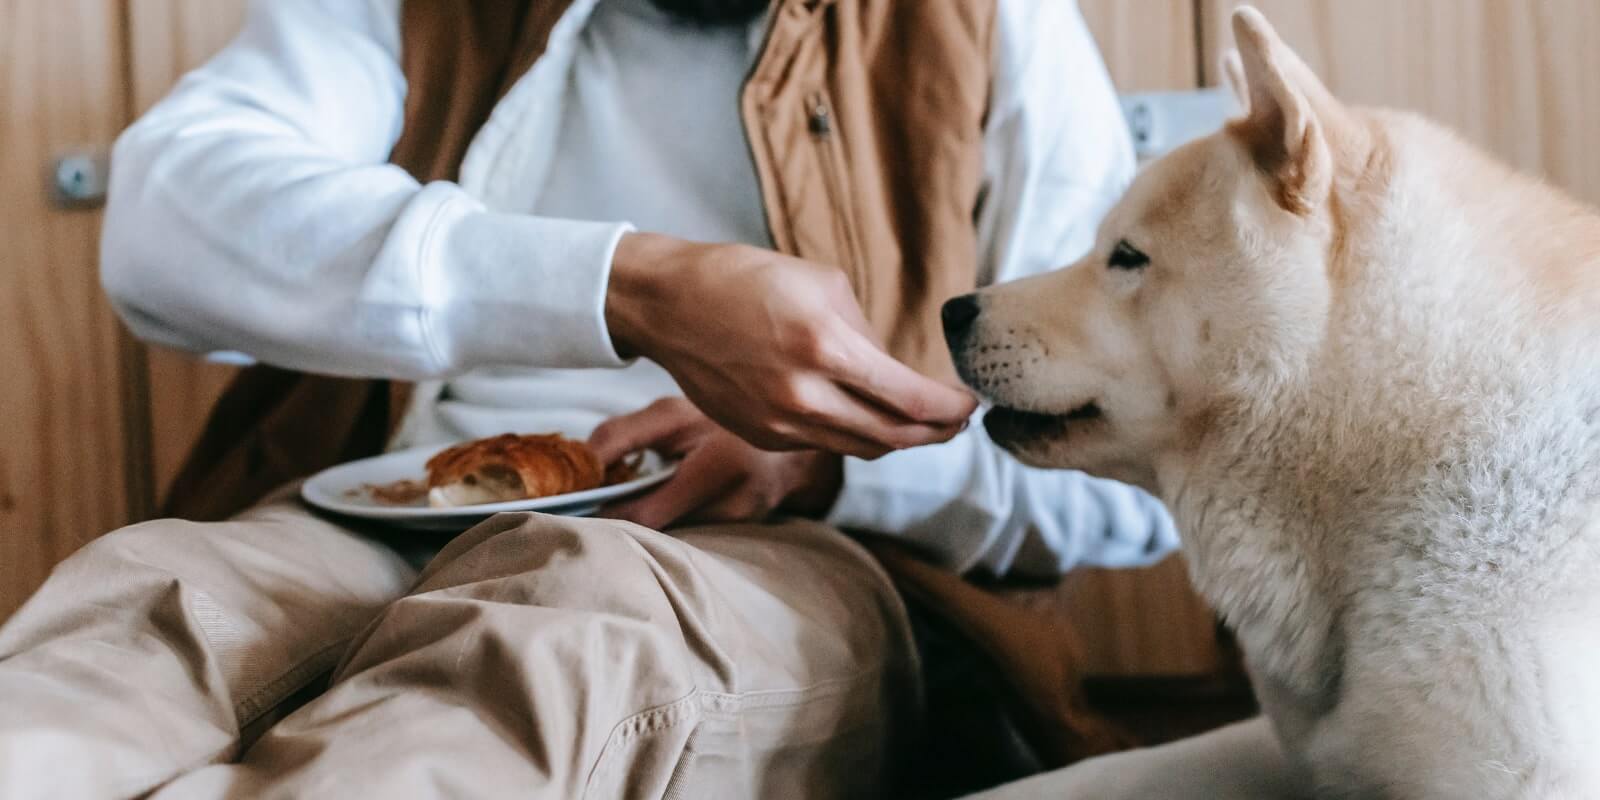 A White Dog Being Fed From A Plate Of A Dessert Dish